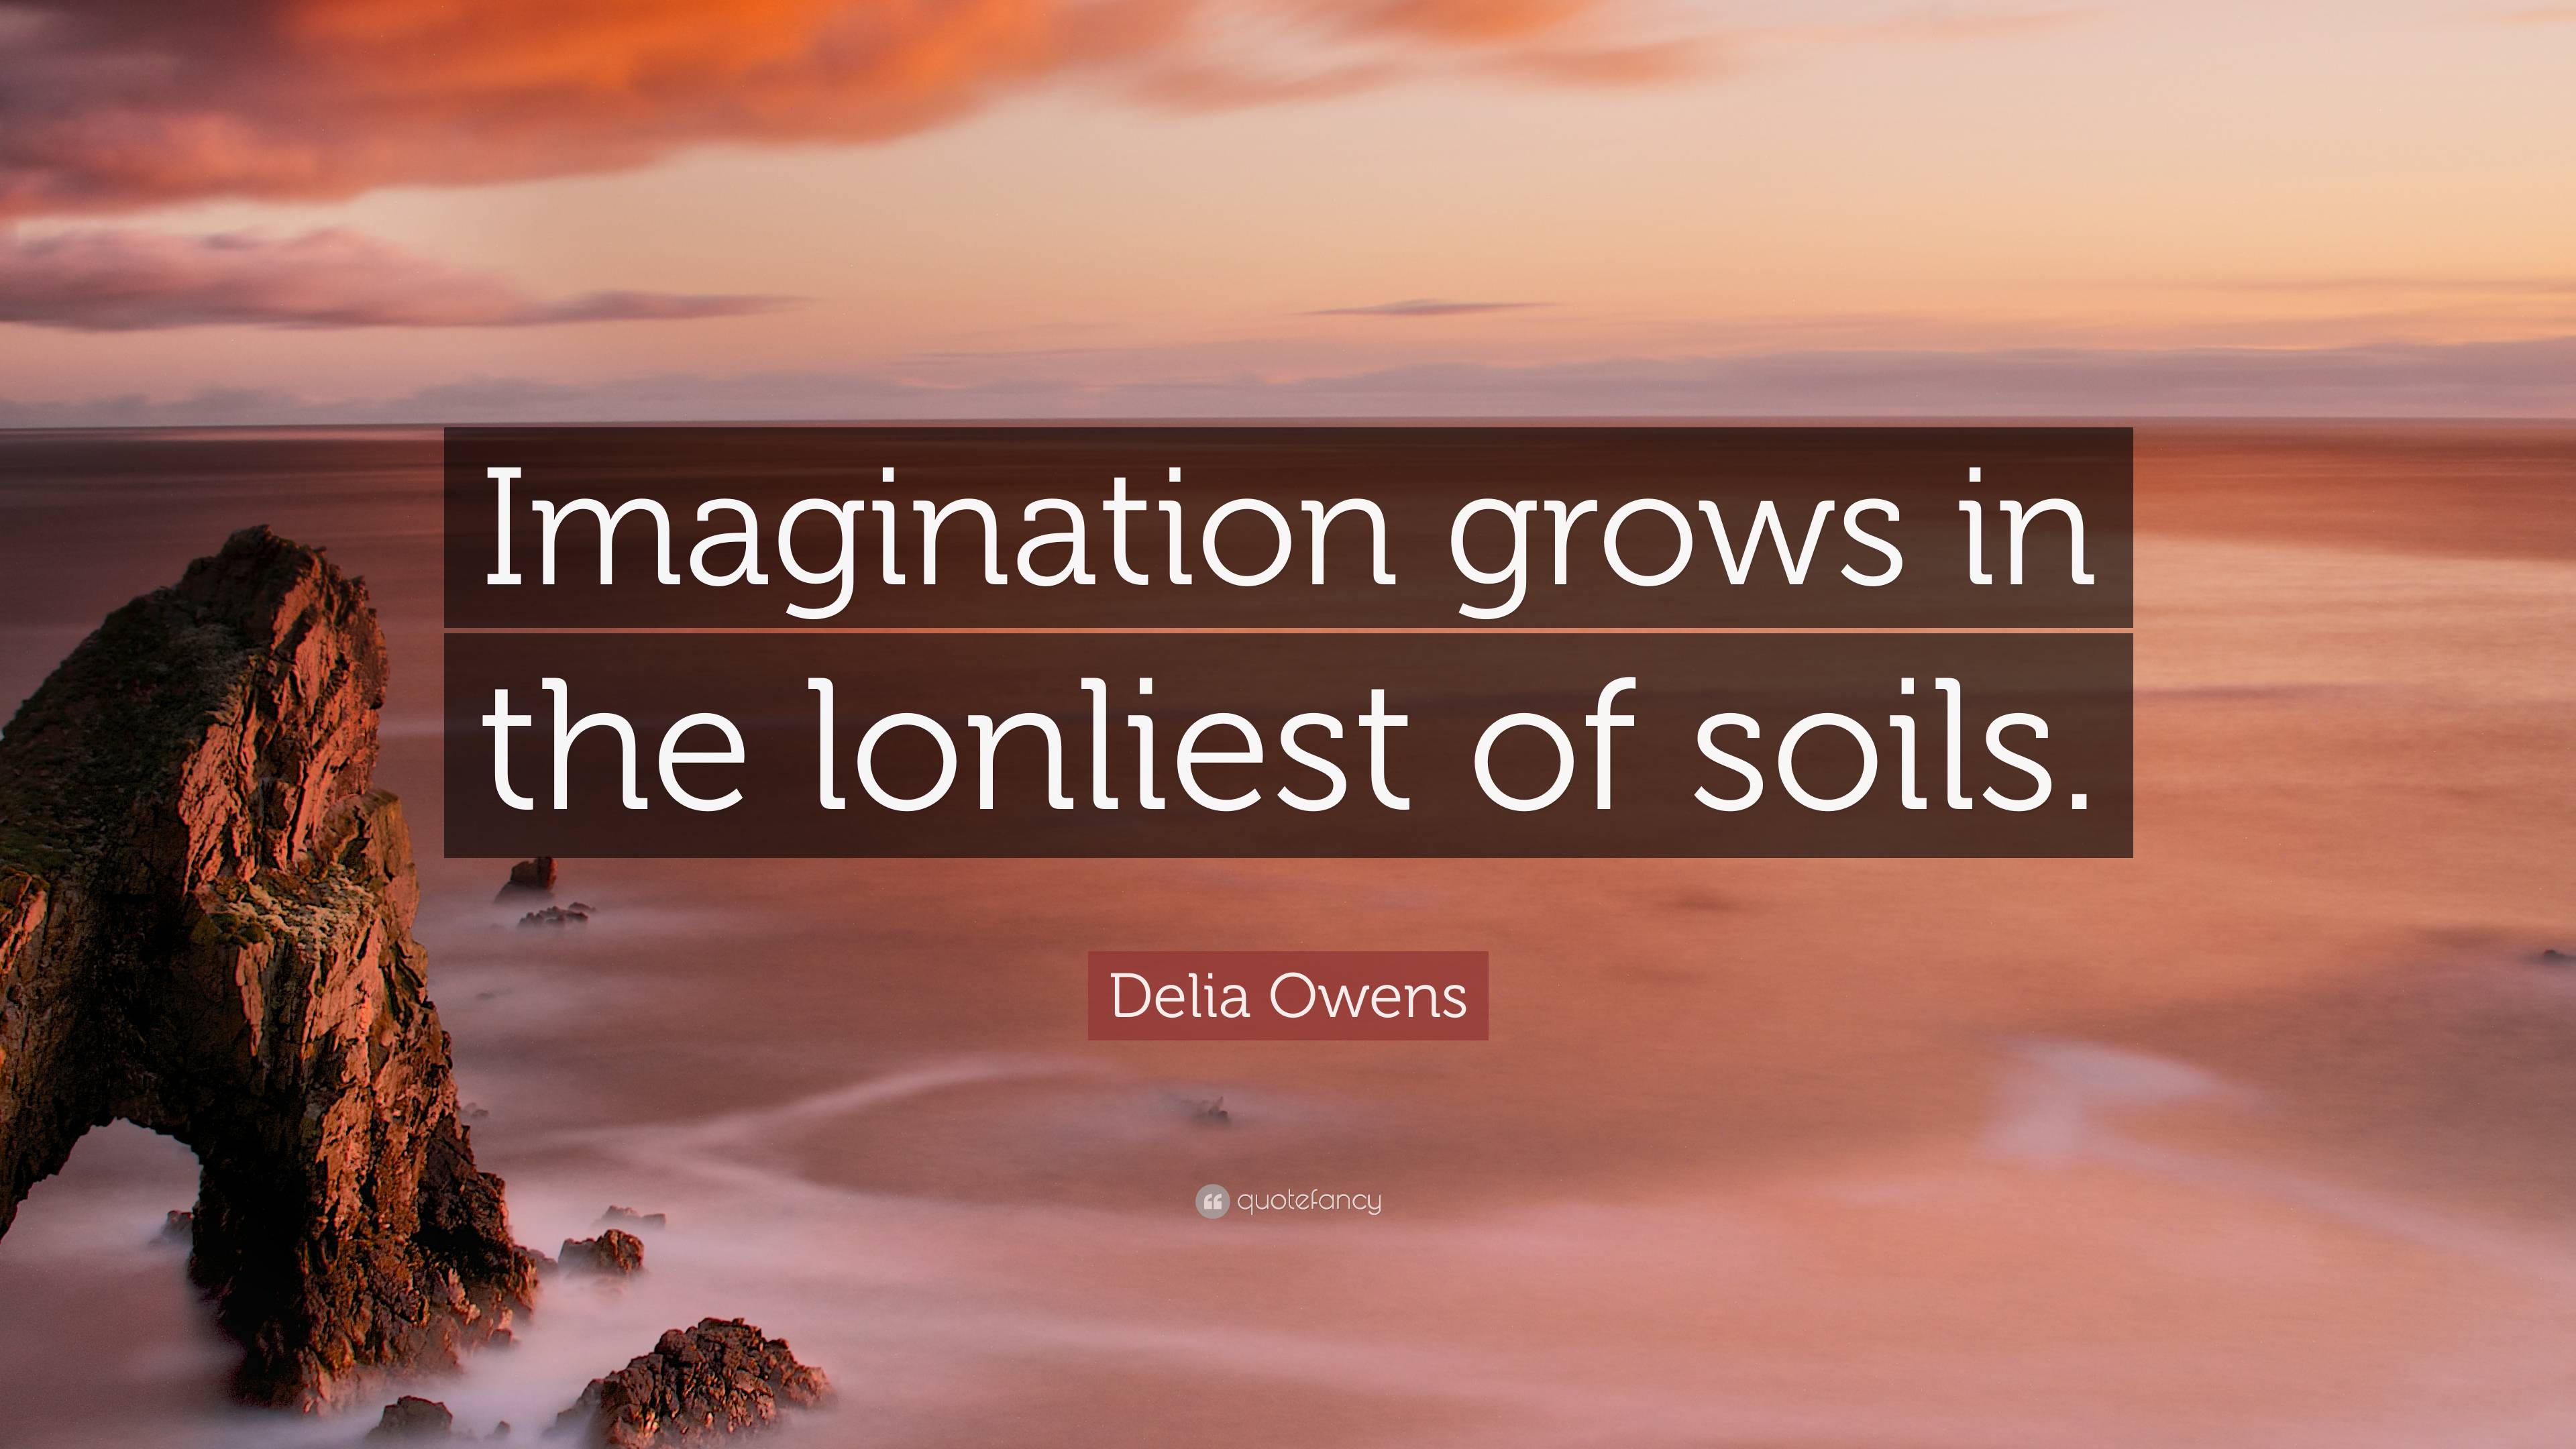 Delia Owens Quote: “Imagination grows in the lonliest of soils.”